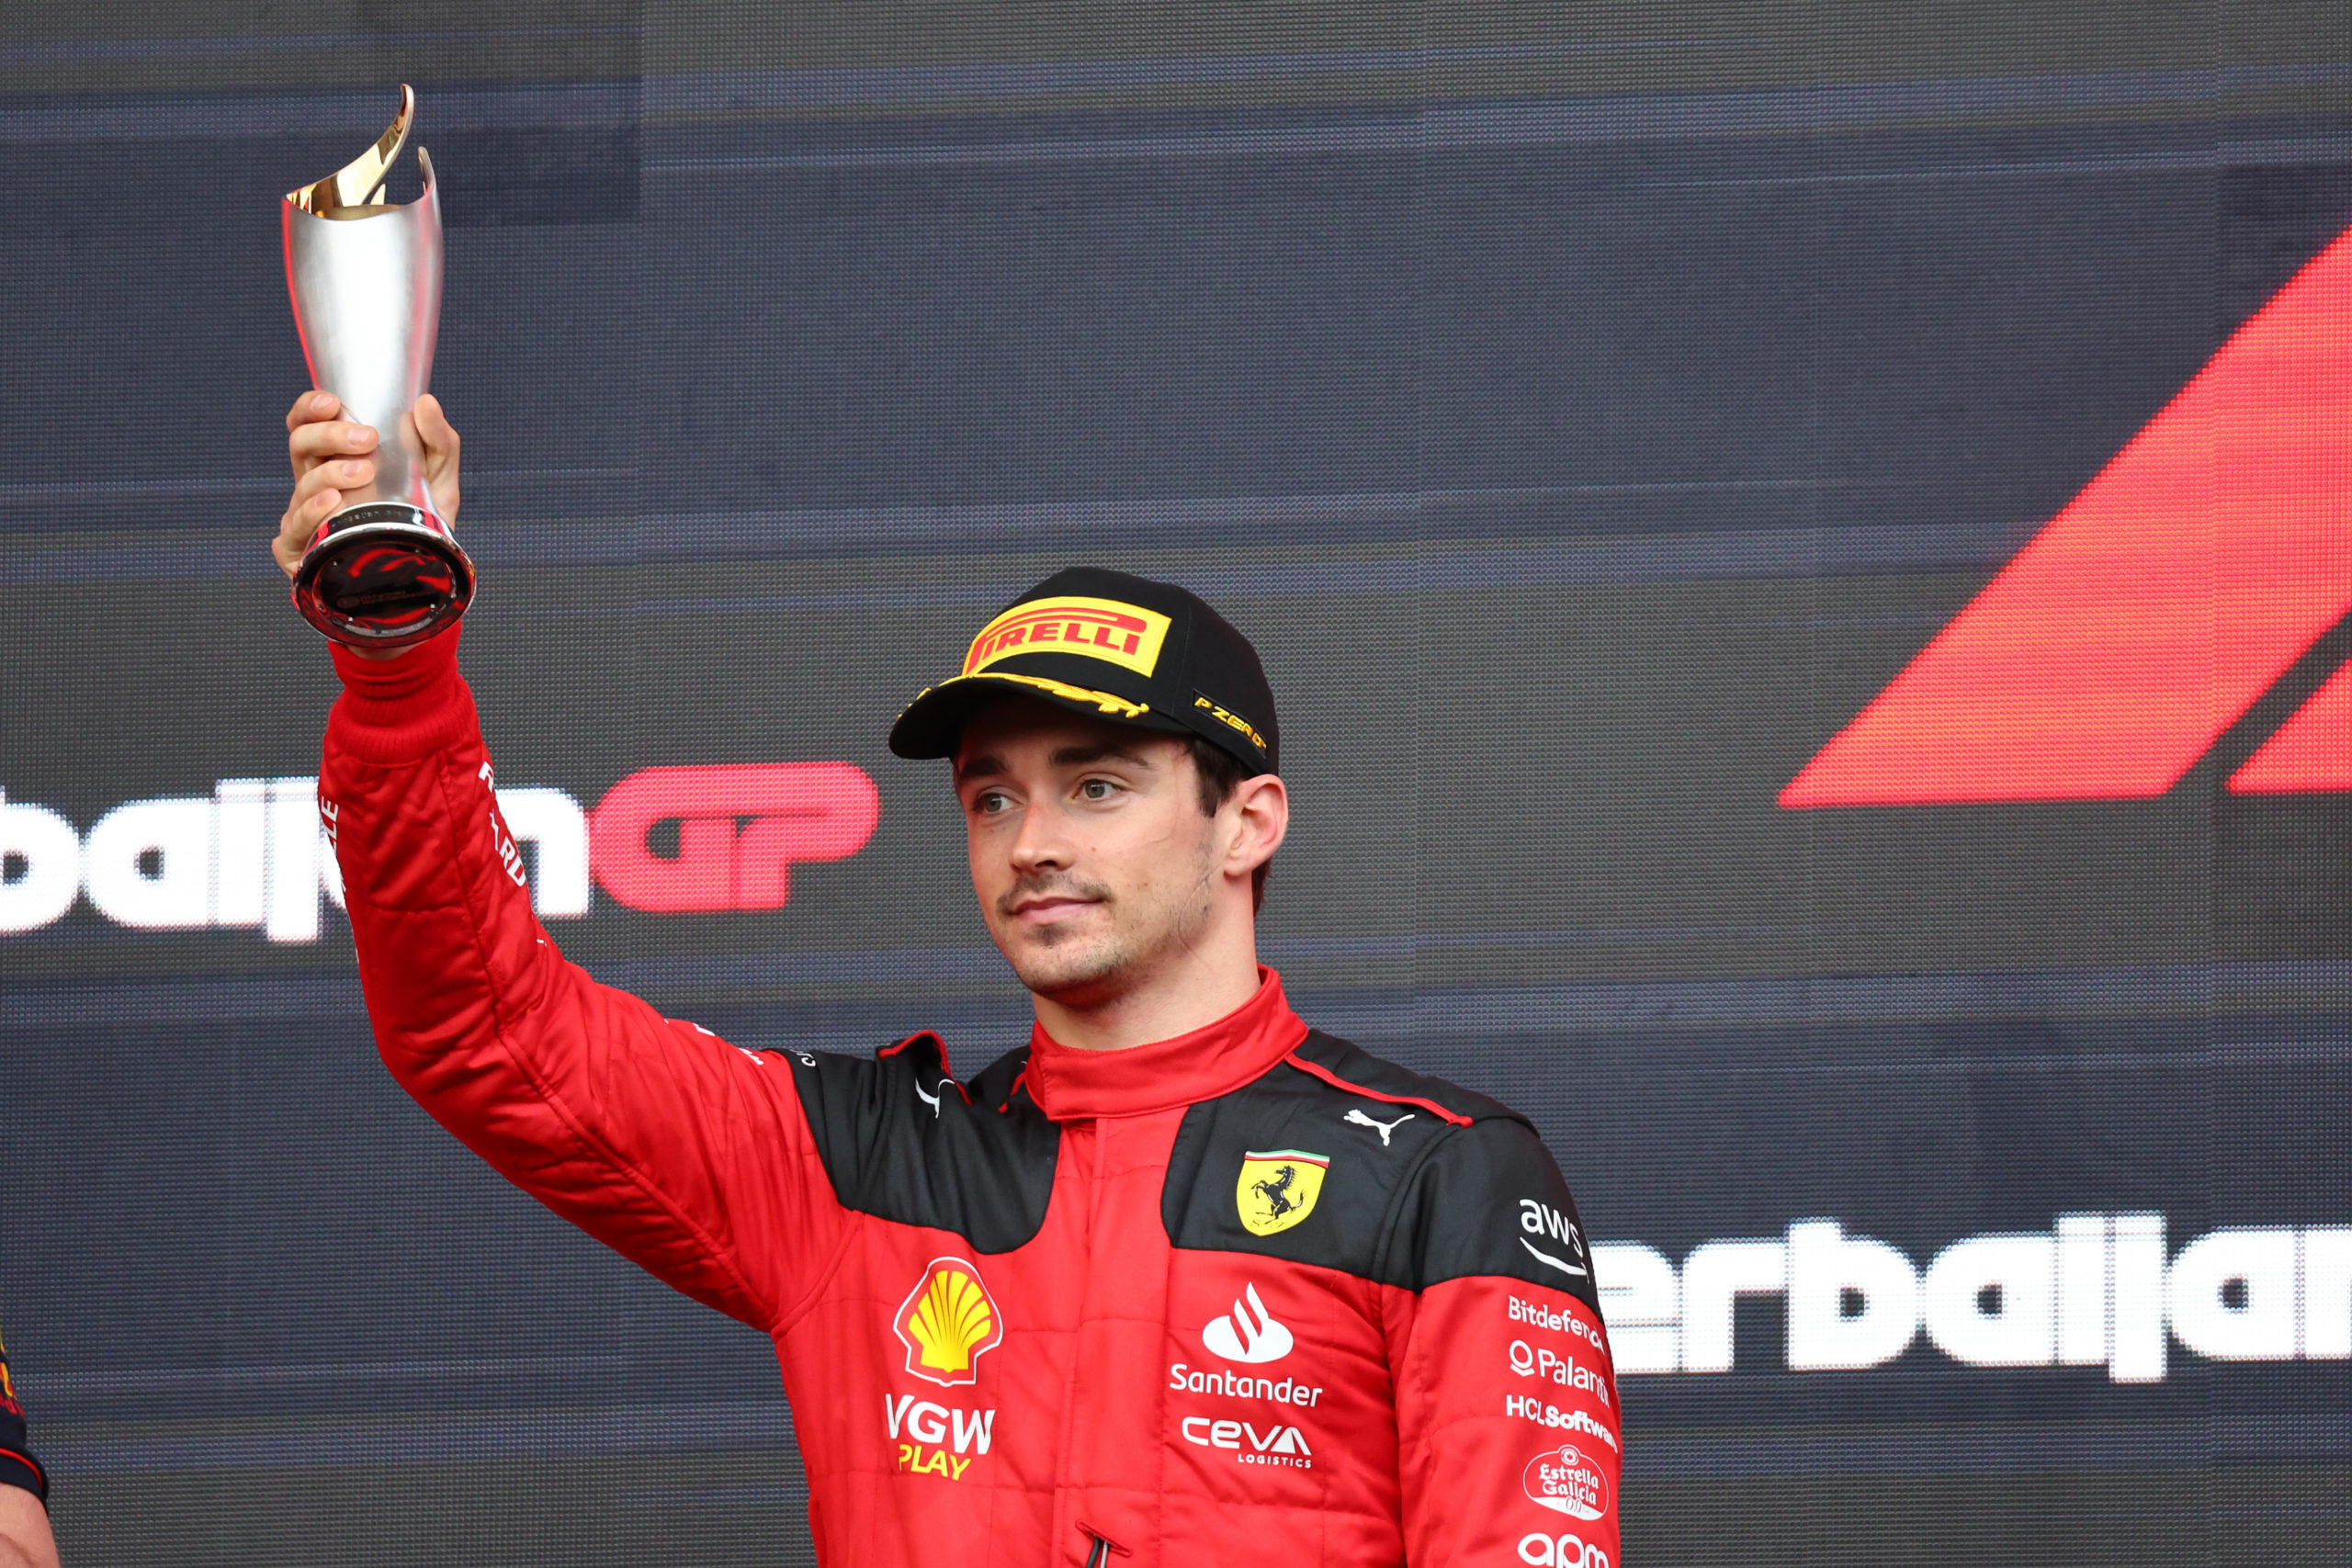 leclerc magic can’t be the one thing keeping ferrari dream alive